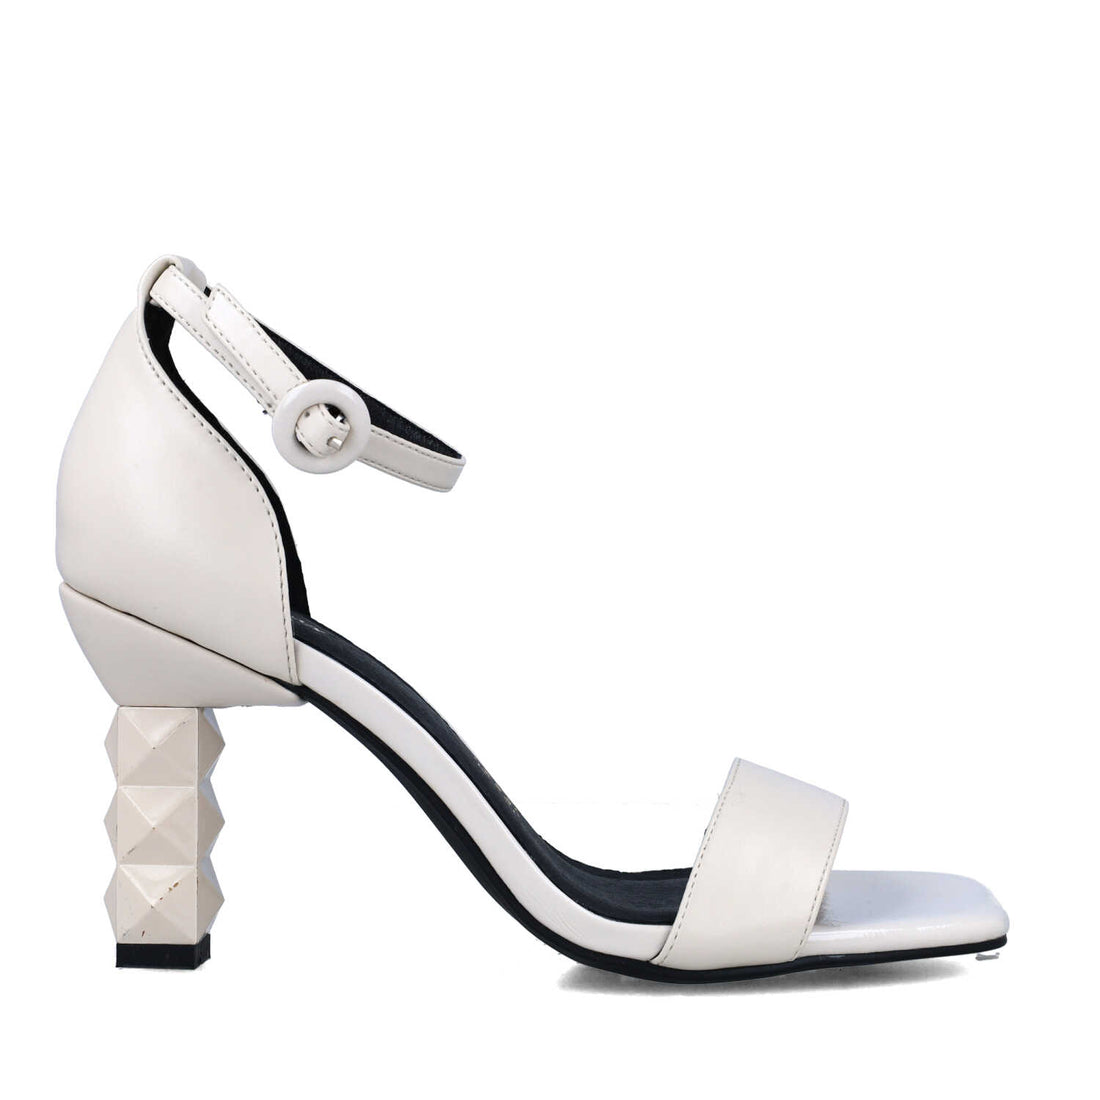 White Ankle-Strap Sandals With Studded Heel